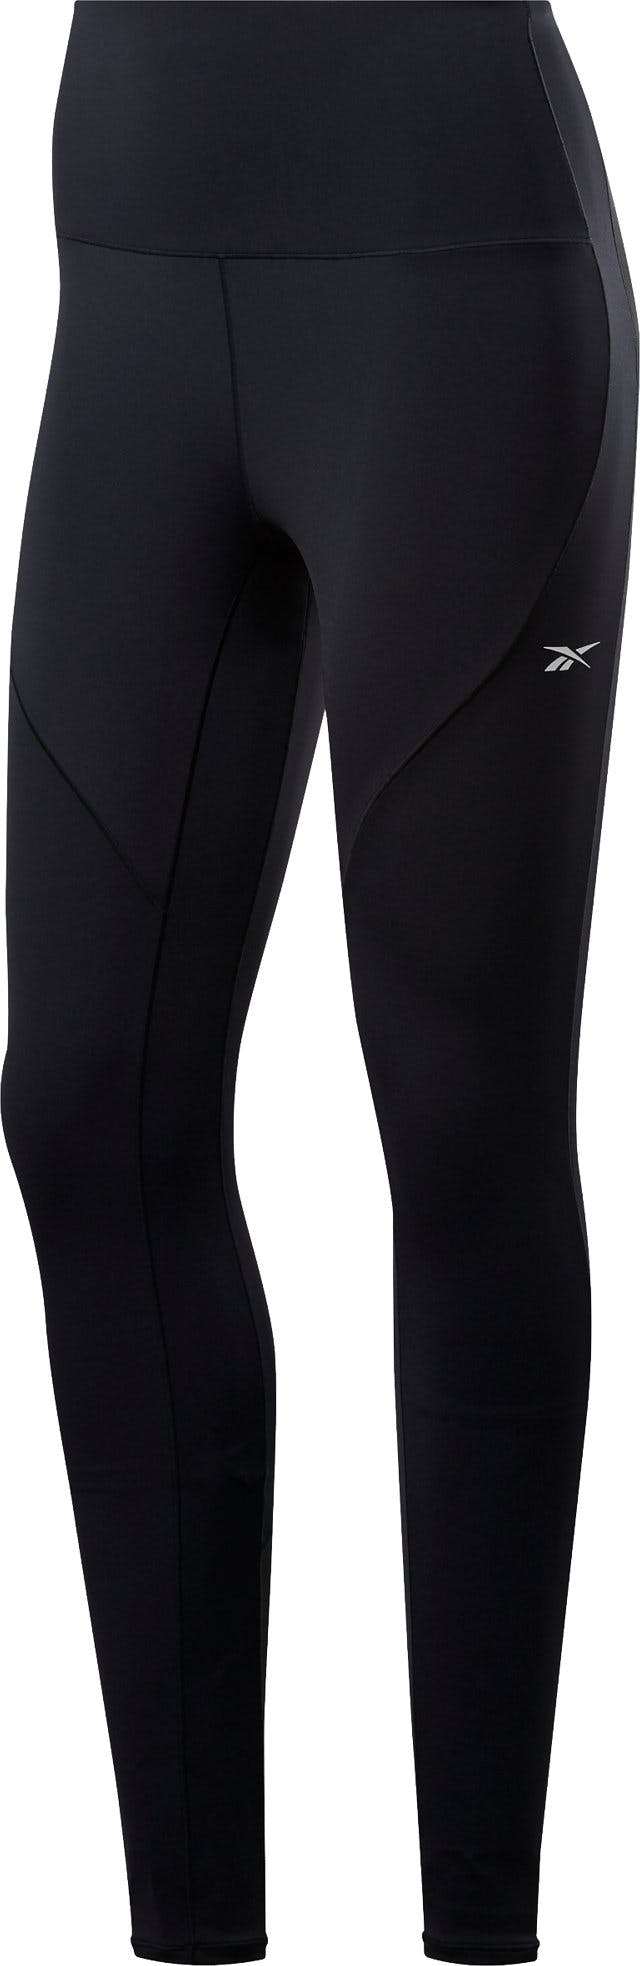 Product image for Reebok Lux Perform High-Rise Tights - Women's